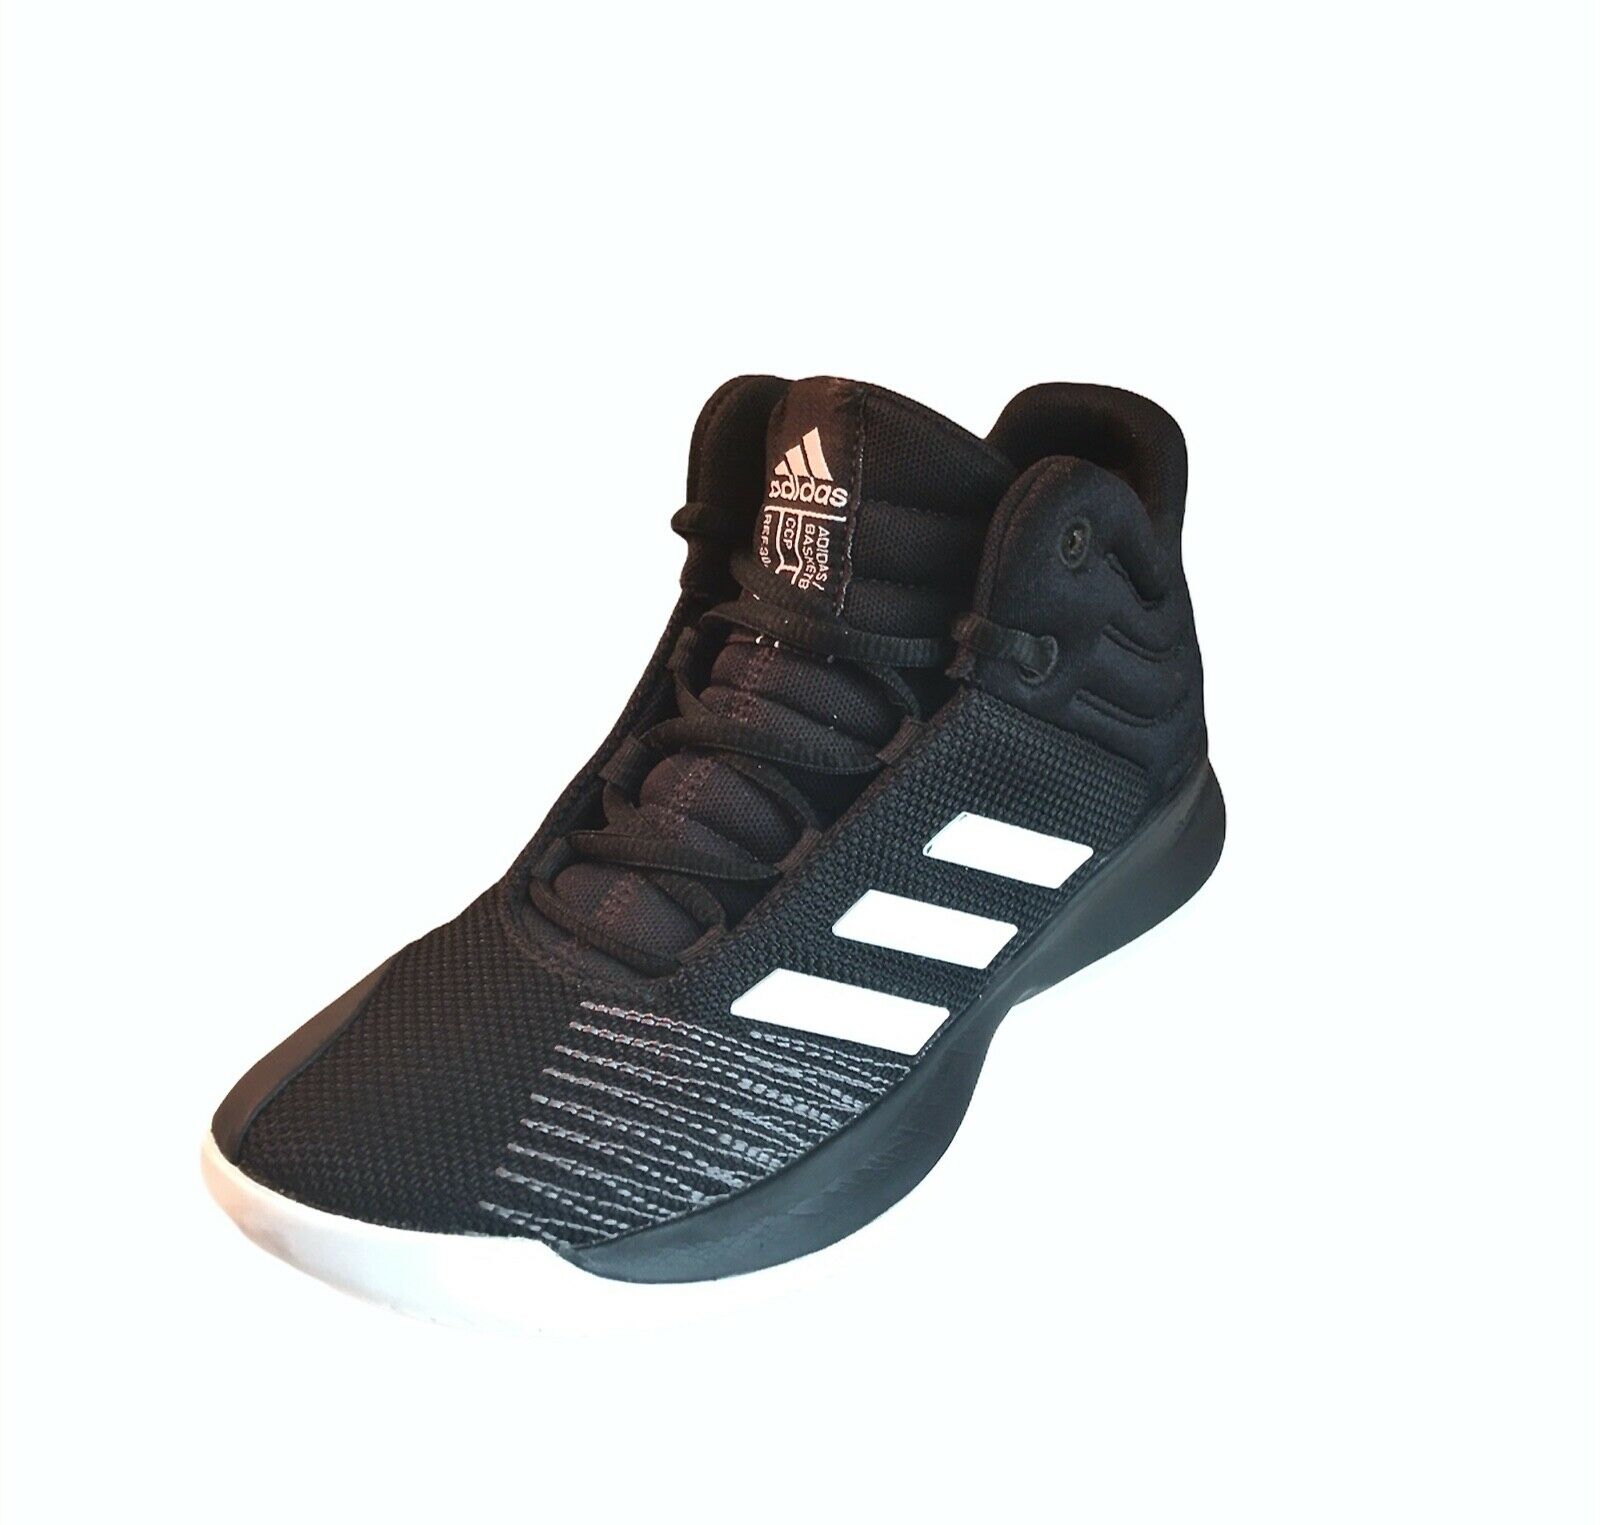 Adidas Boys Size 4.5 Black Basketball Sneaker Shoes Youth